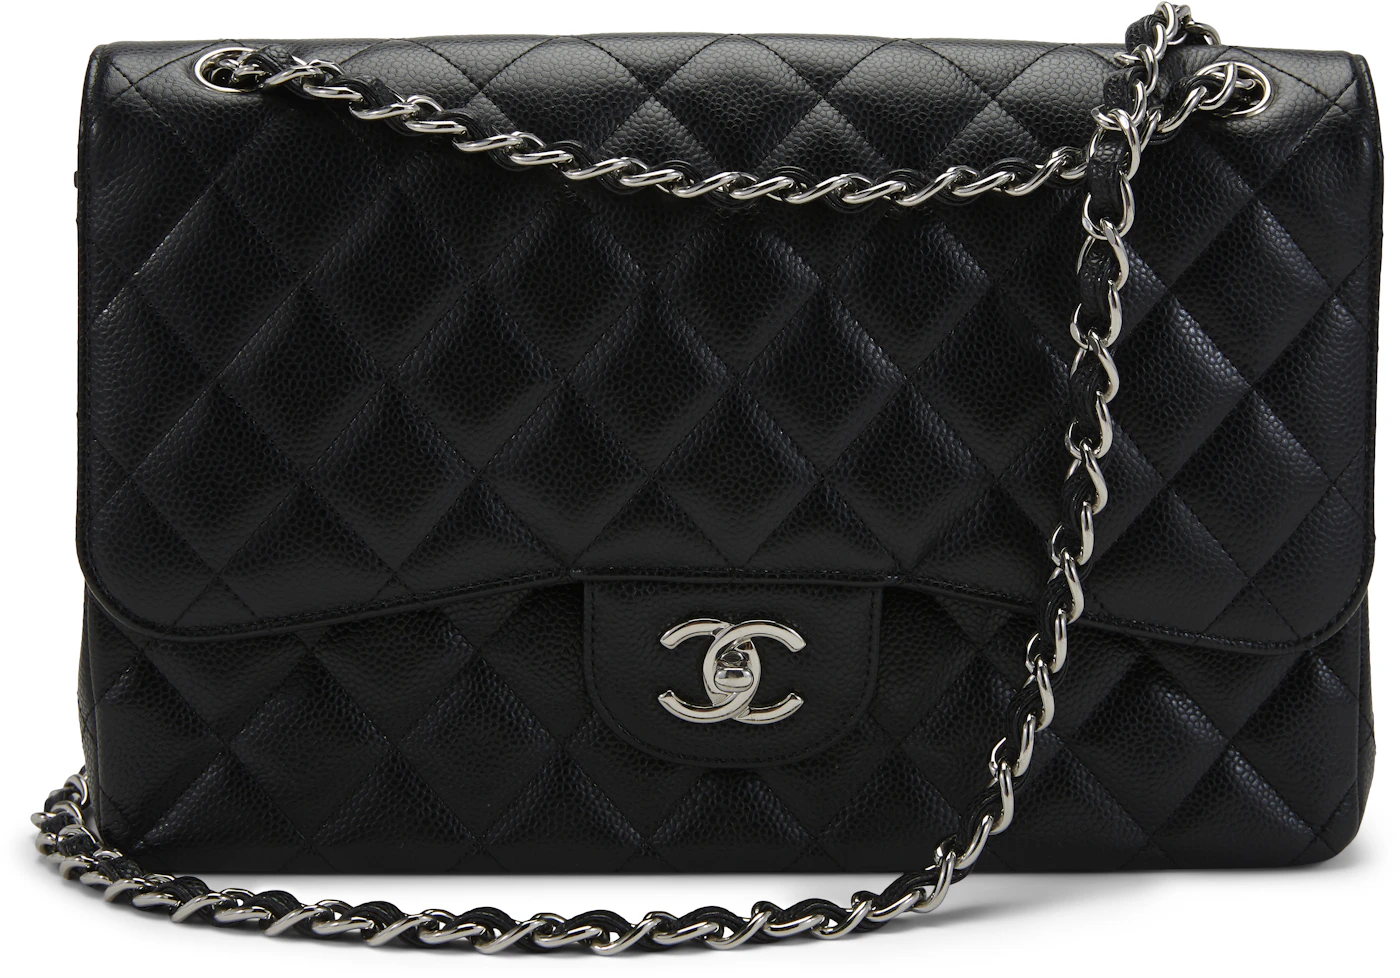 CHANEL – The Vault By Volpe Beringer